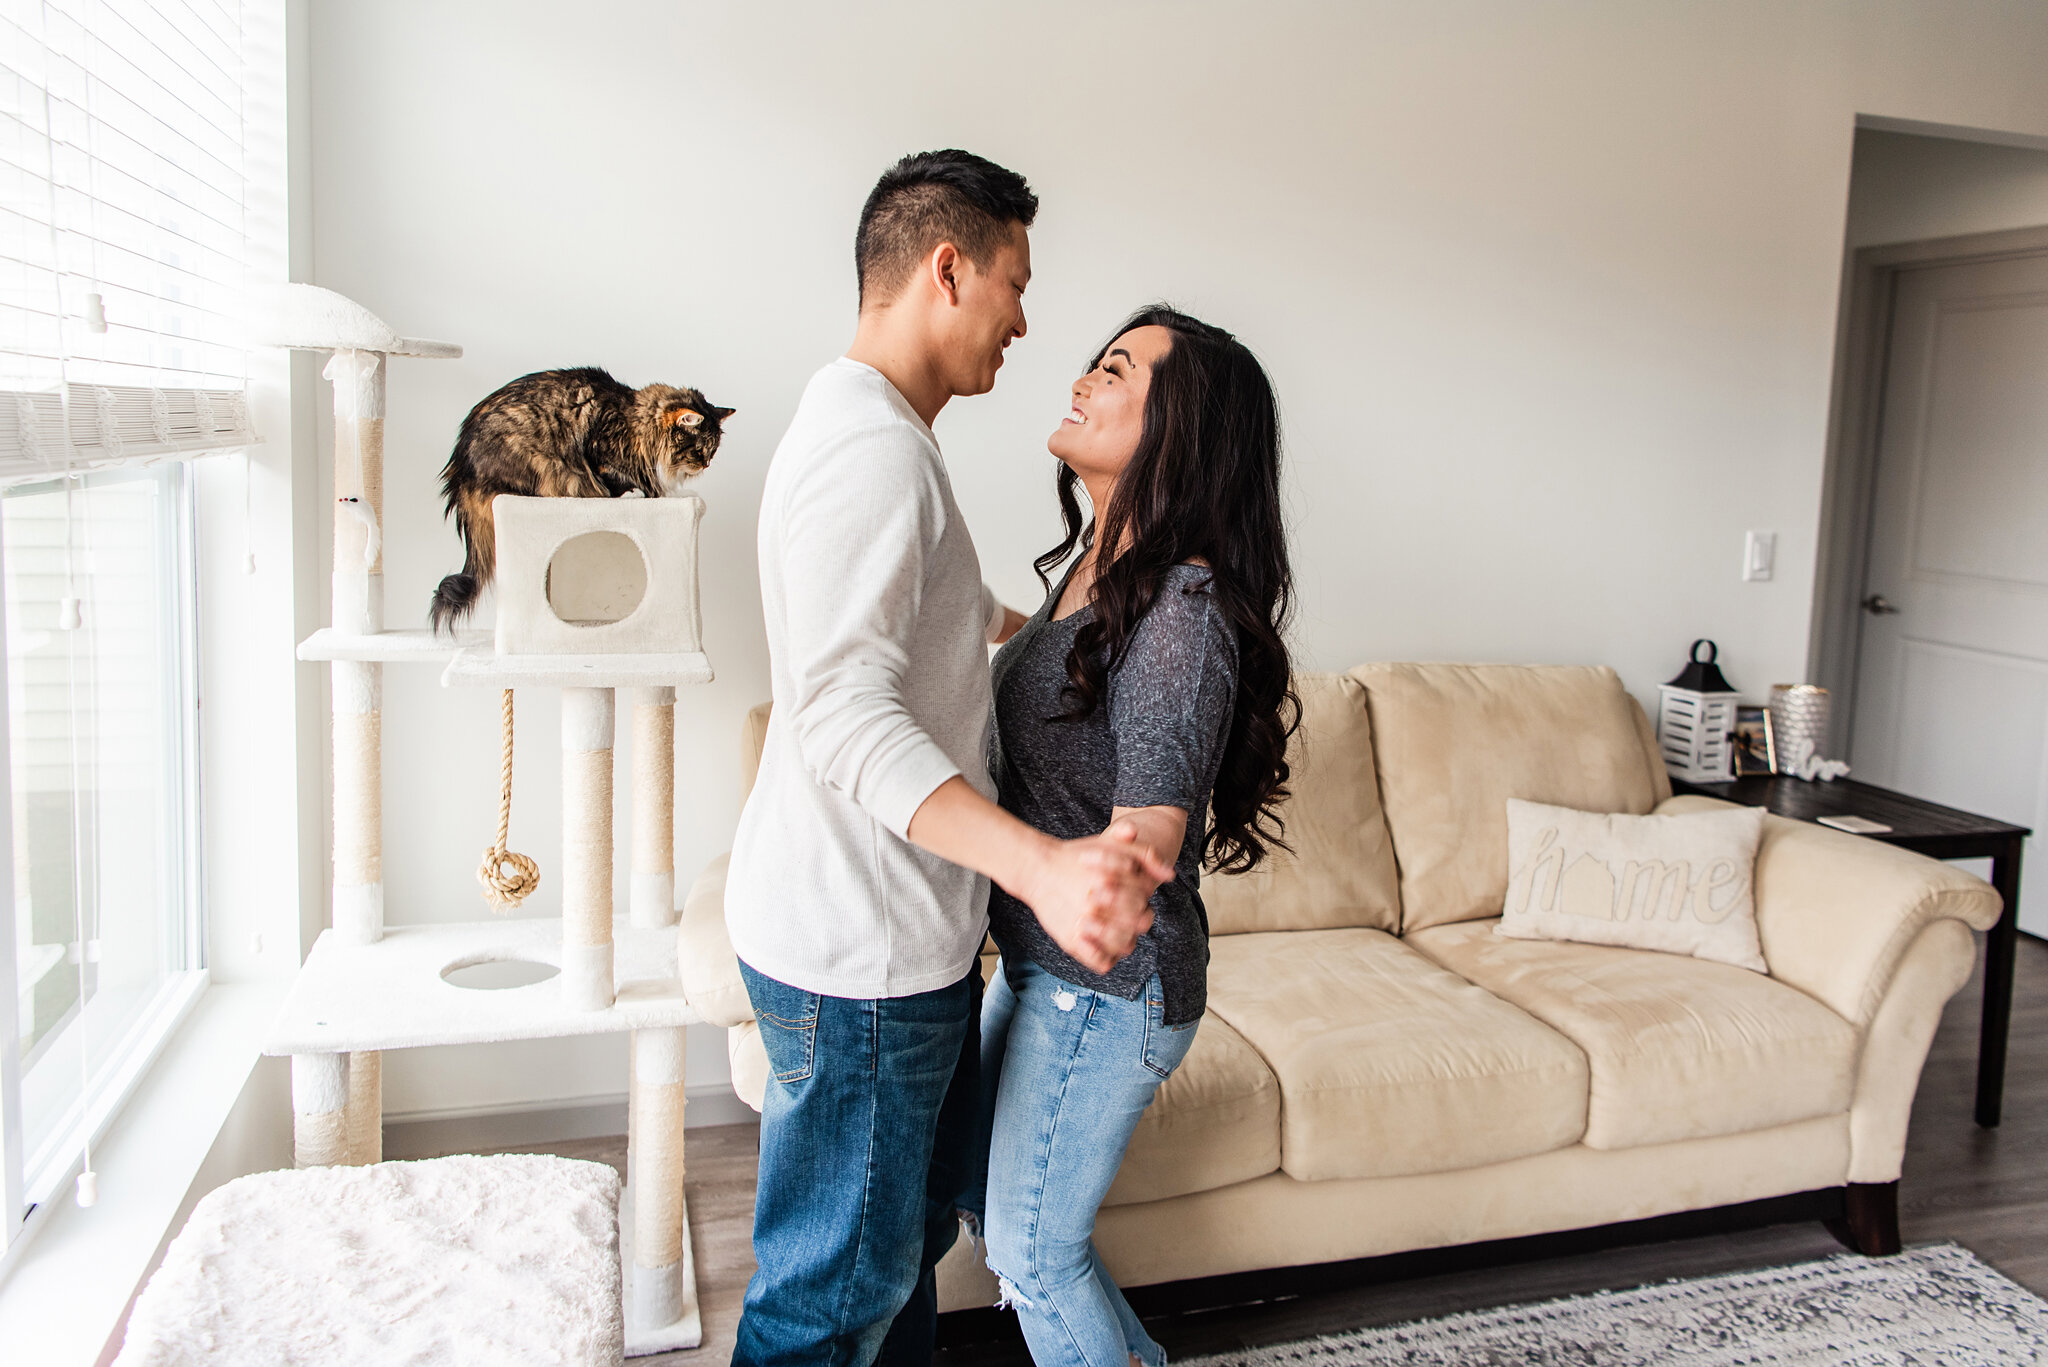 In_Home_Rochester_Couples_Session_JILL_STUDIO_Rochester_NY_Photographer_4140.jpg